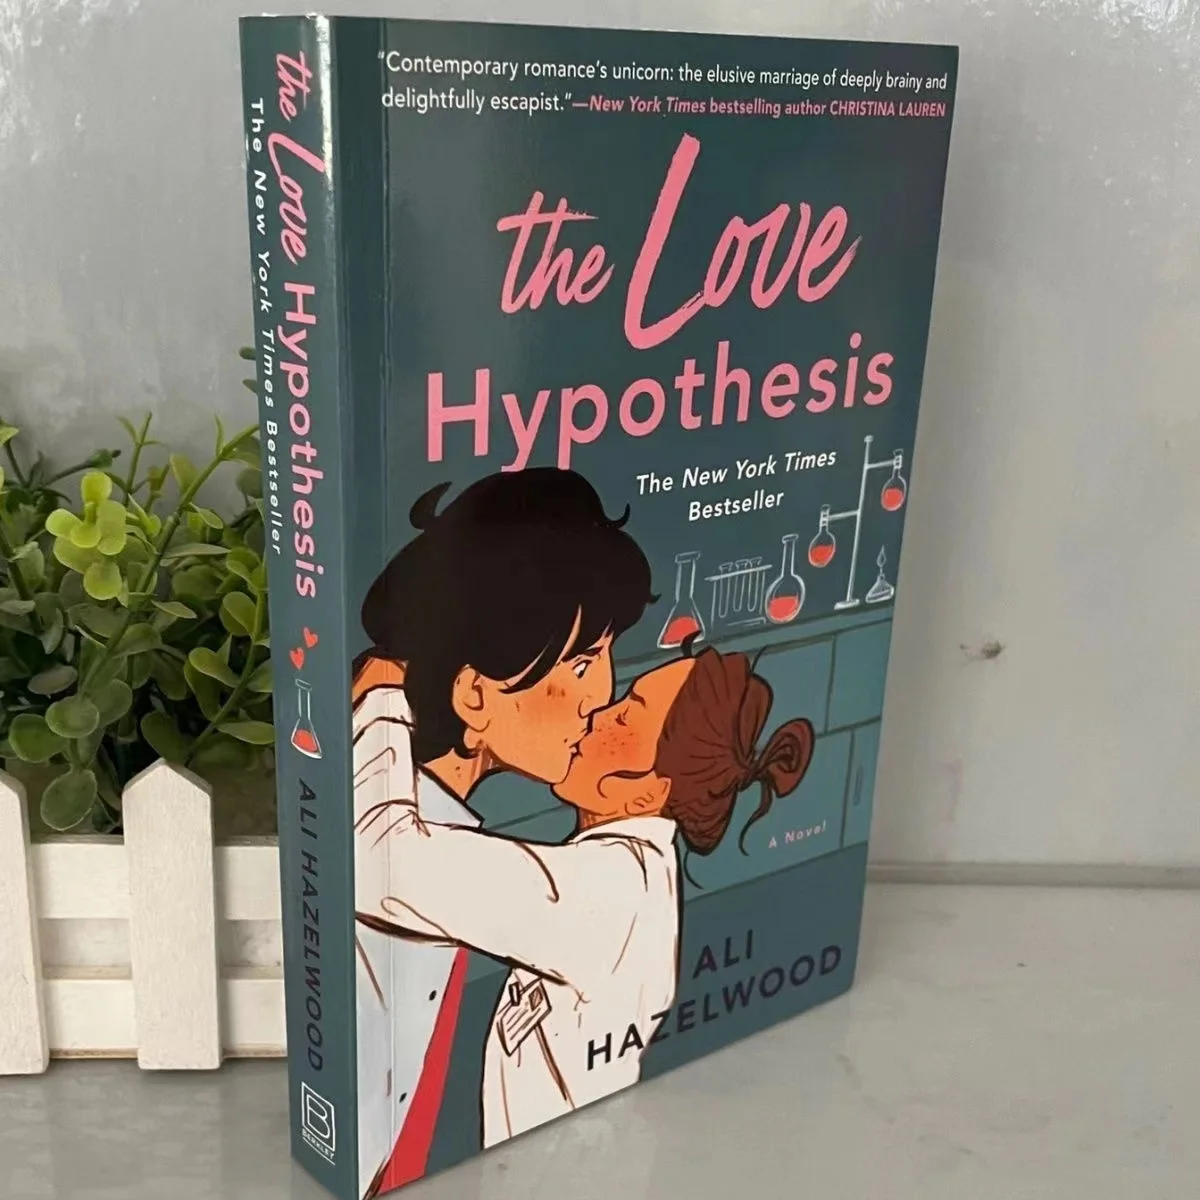 

The Love Hypothesis By Ali Hazelwood Love Story Romance Novel for Teen & Adult The New York Times Best Seller English Book